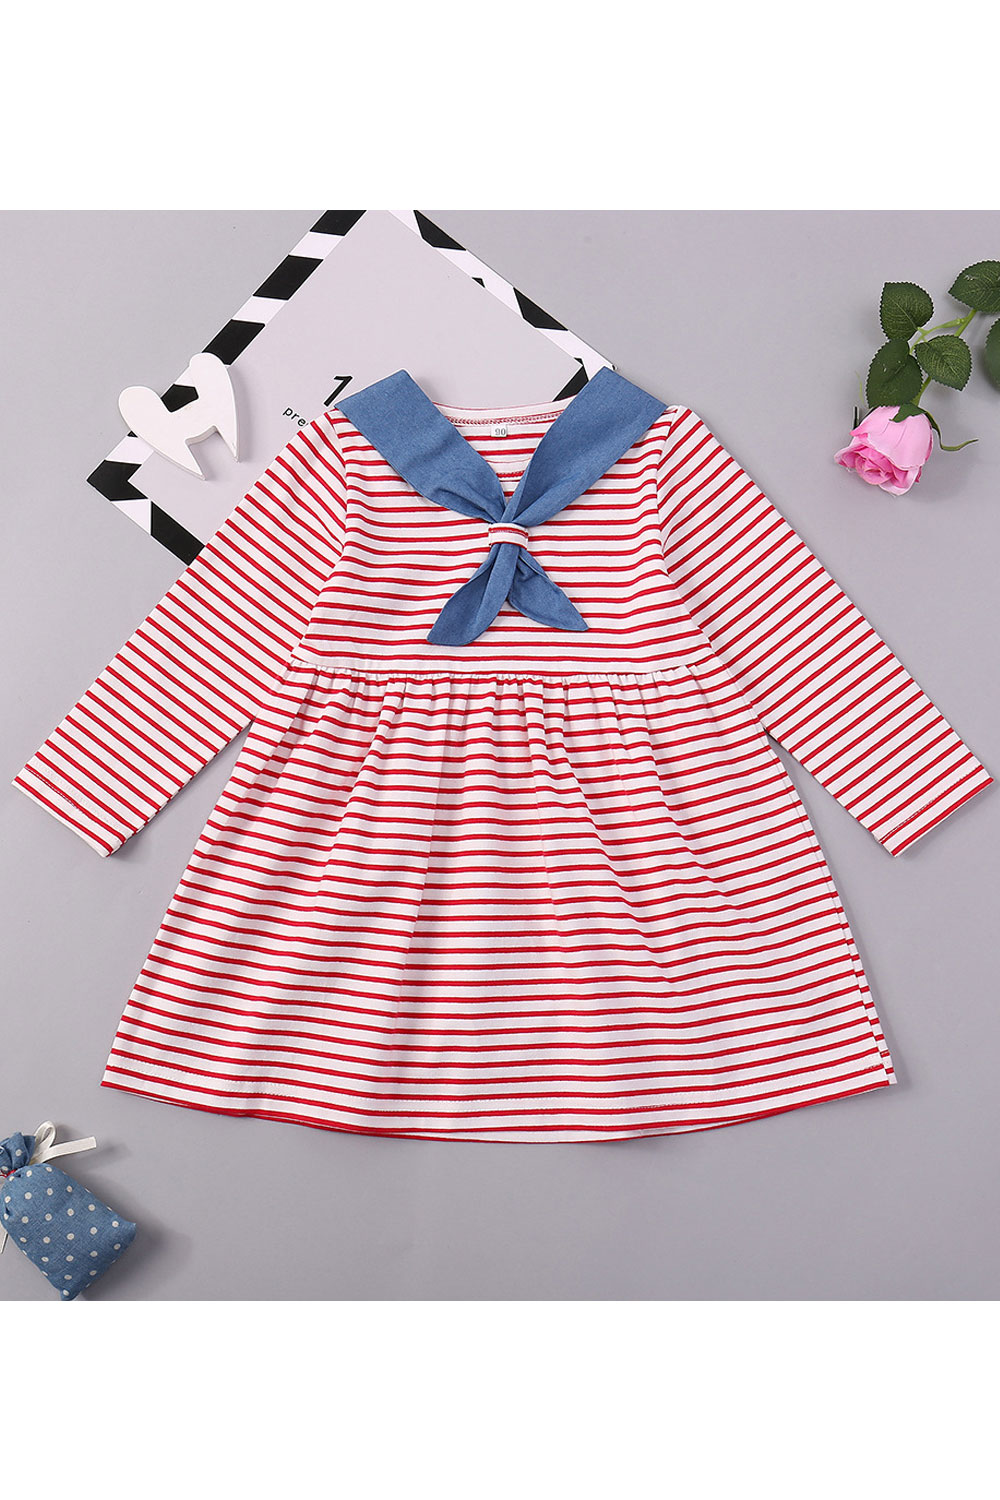 Ketty More Baby Girls Red & White Striped Long Sleeve Dress